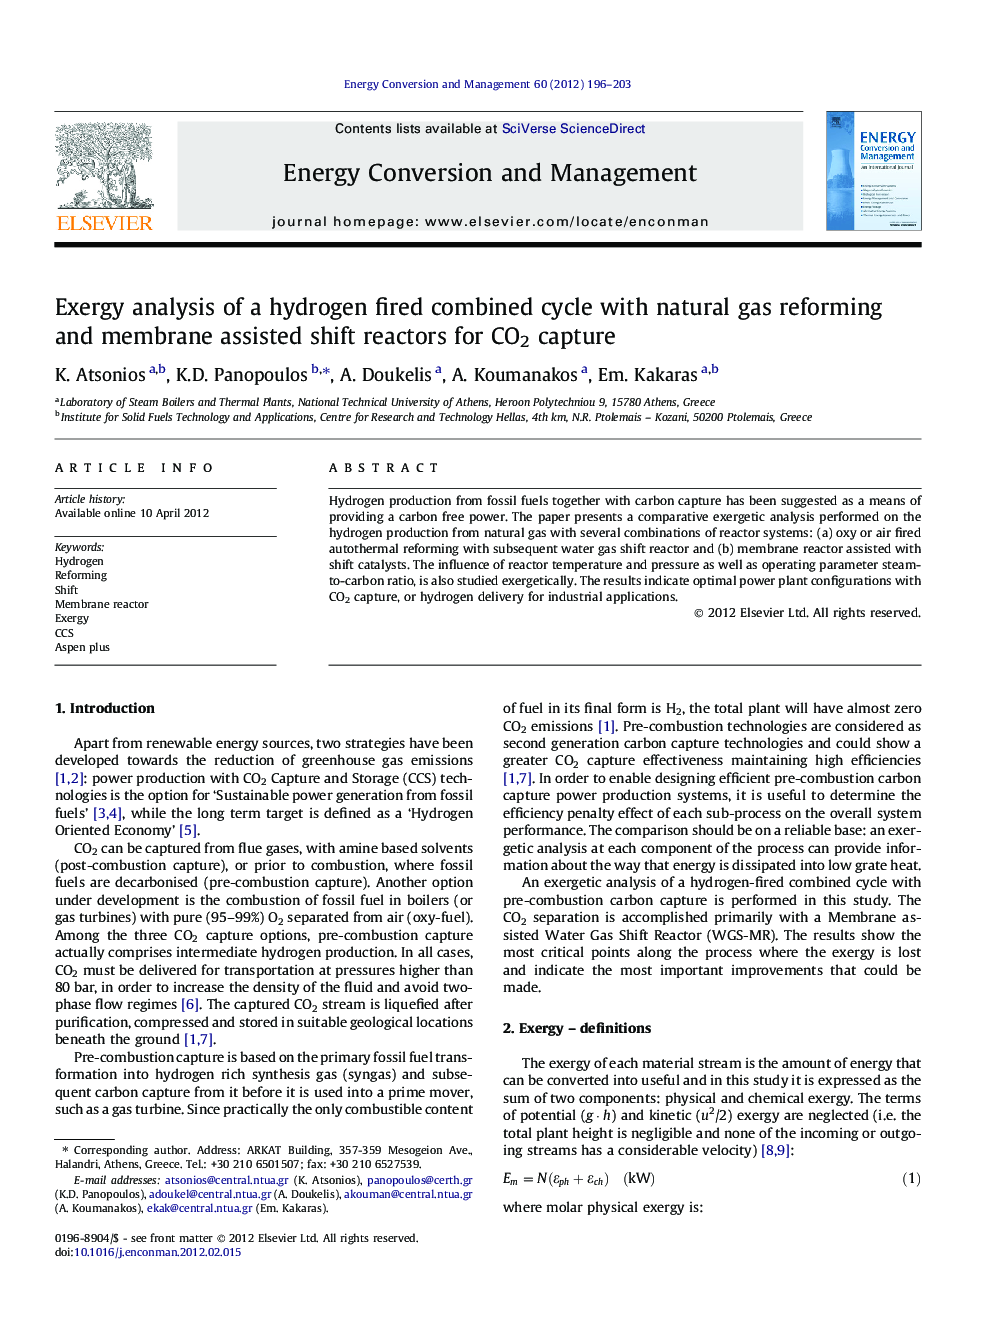 Exergy analysis of a hydrogen fired combined cycle with natural gas reforming and membrane assisted shift reactors for CO2 capture